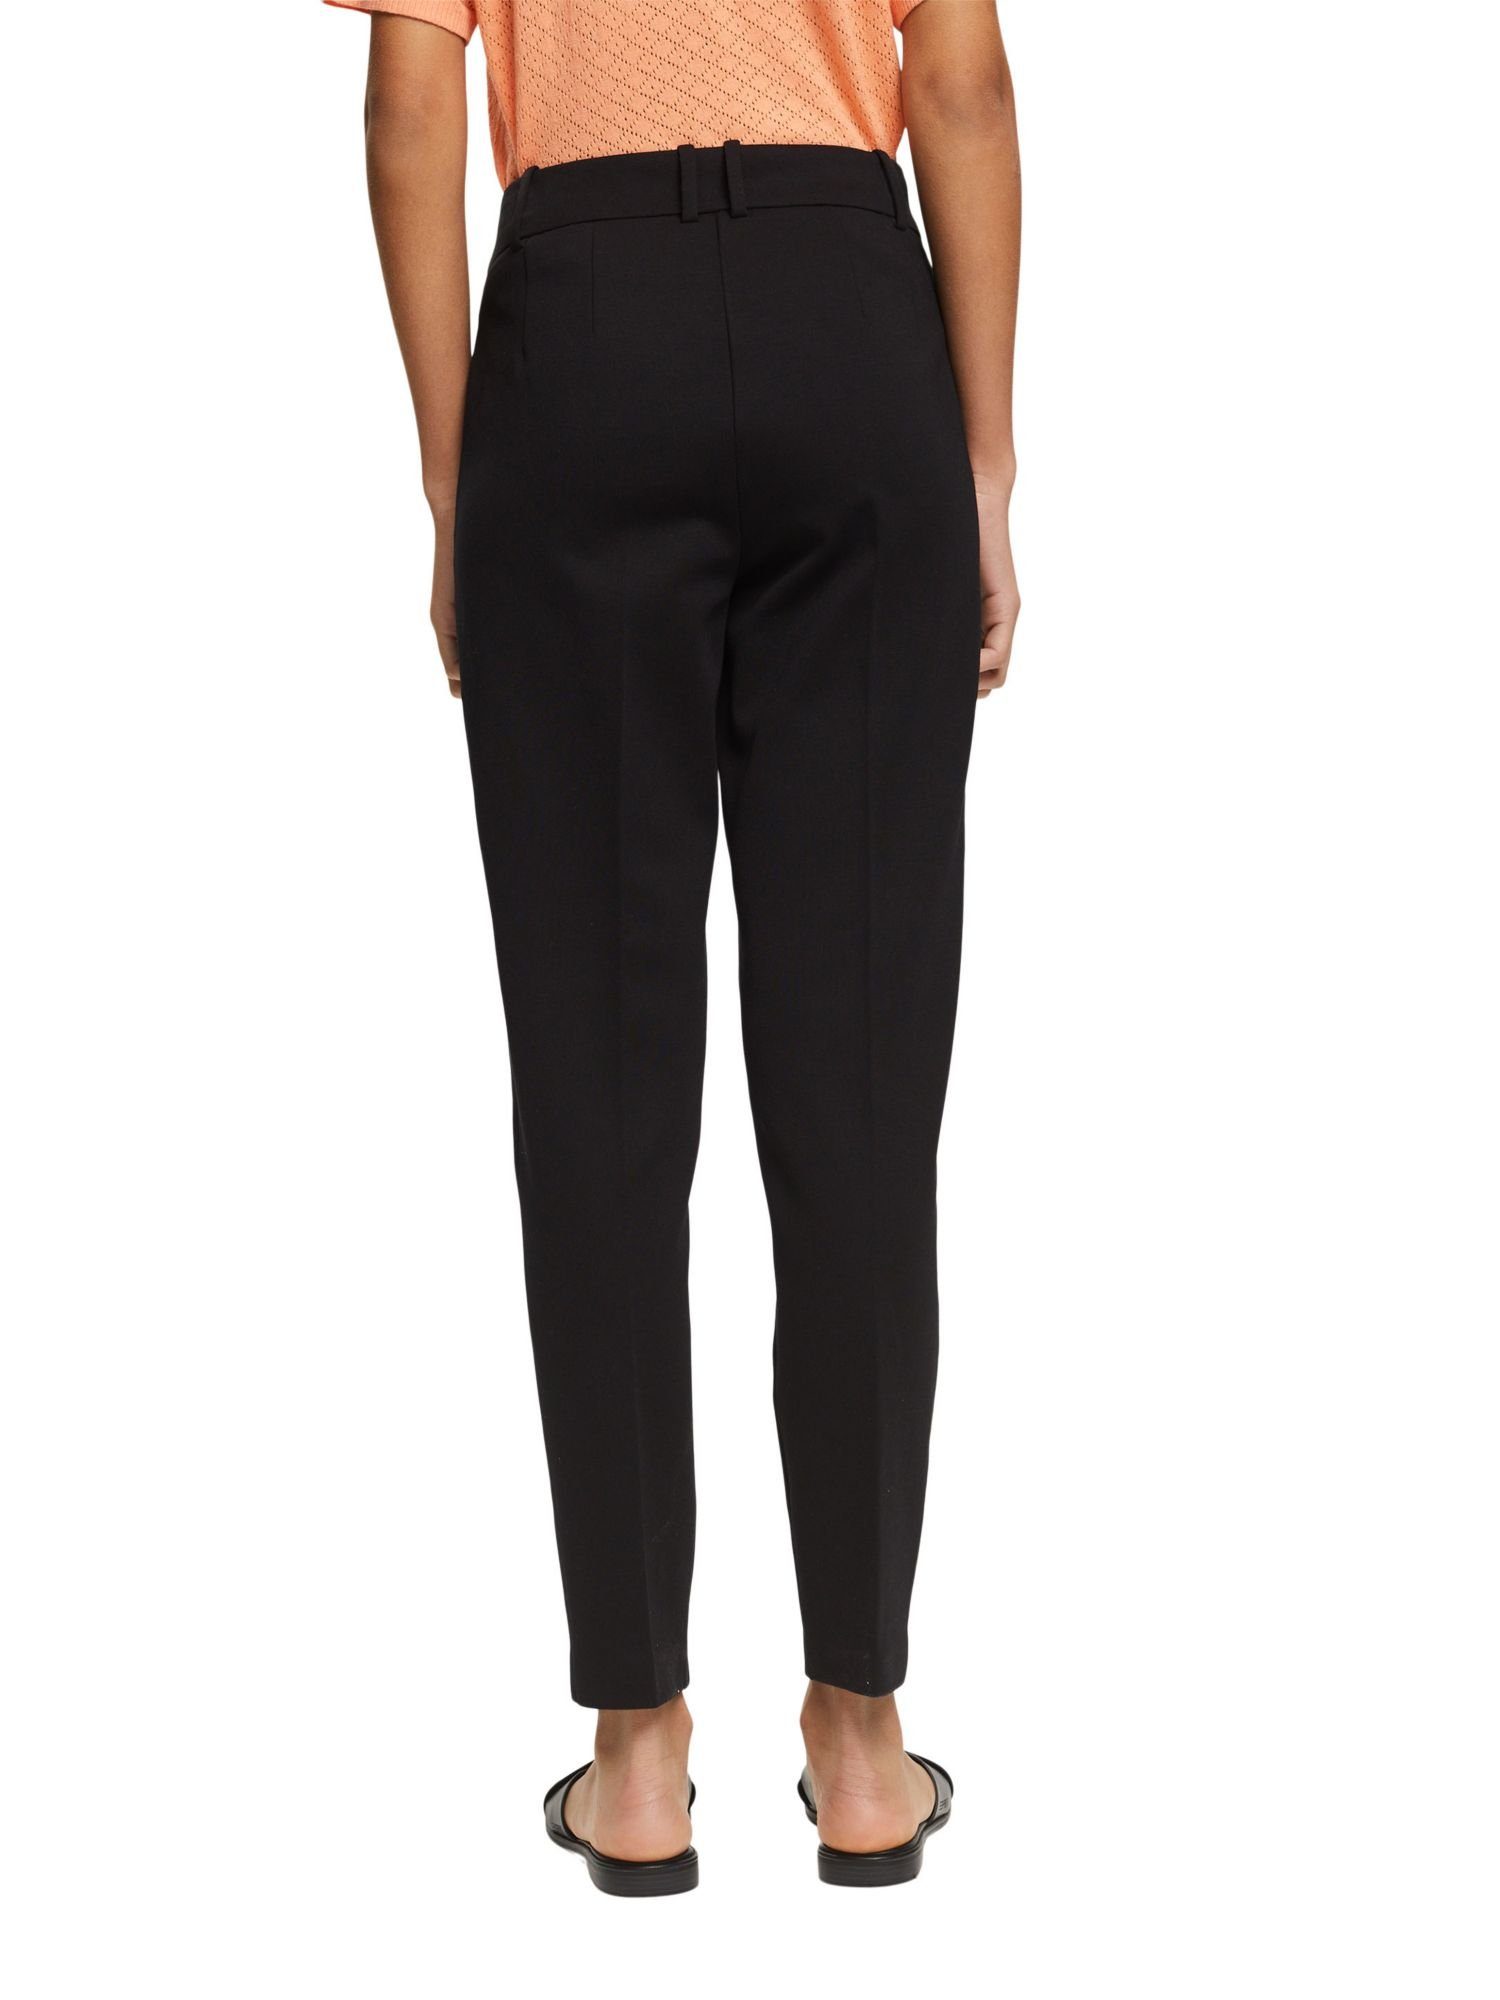 Collection Tapered PUNTO Pants & SPORTY Stretch-Hose Match Mix Esprit BLACK